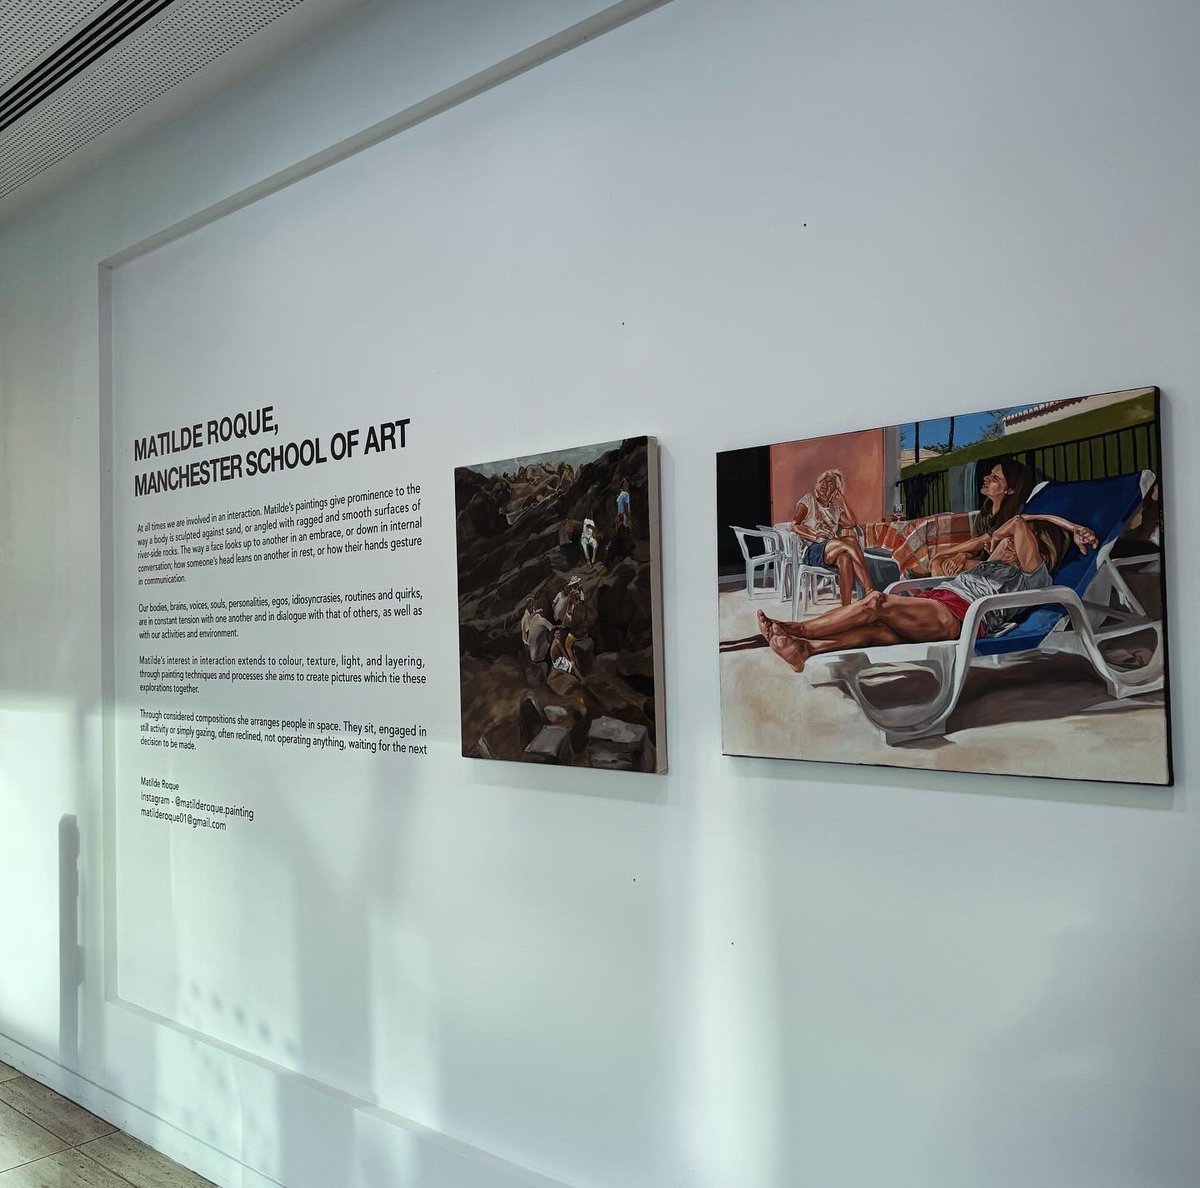 The amazing Matilde Roque from @McrSchArt on display in our lobby👩‍🎨🖼️  #Spinningfields #SchoolOfArt